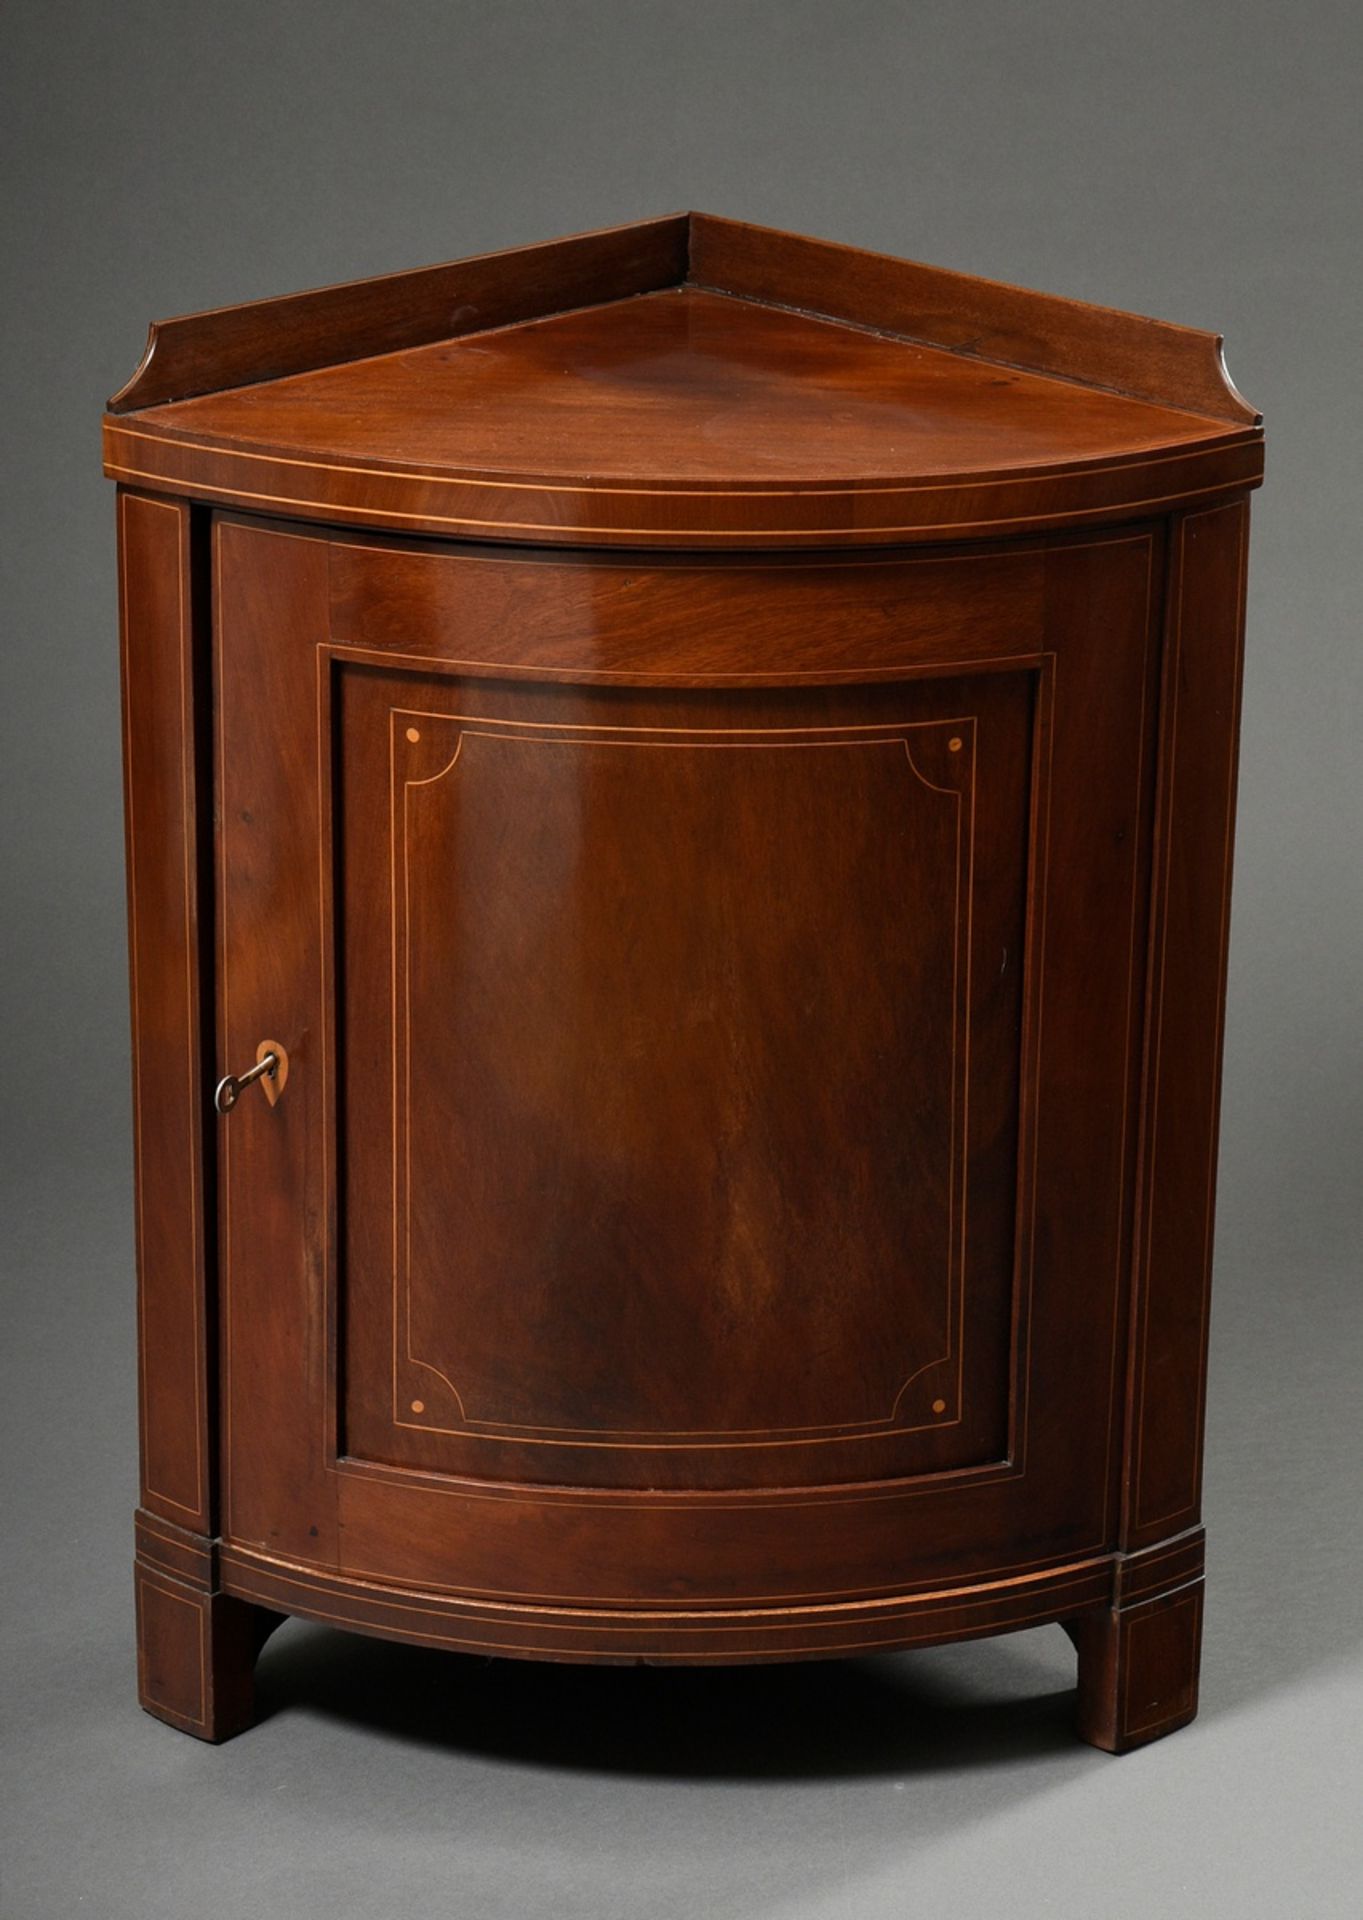 Small corner cupboard with rounded front, mahogany veneer with light inlays, England c. 1900, 82x62 - Image 2 of 5